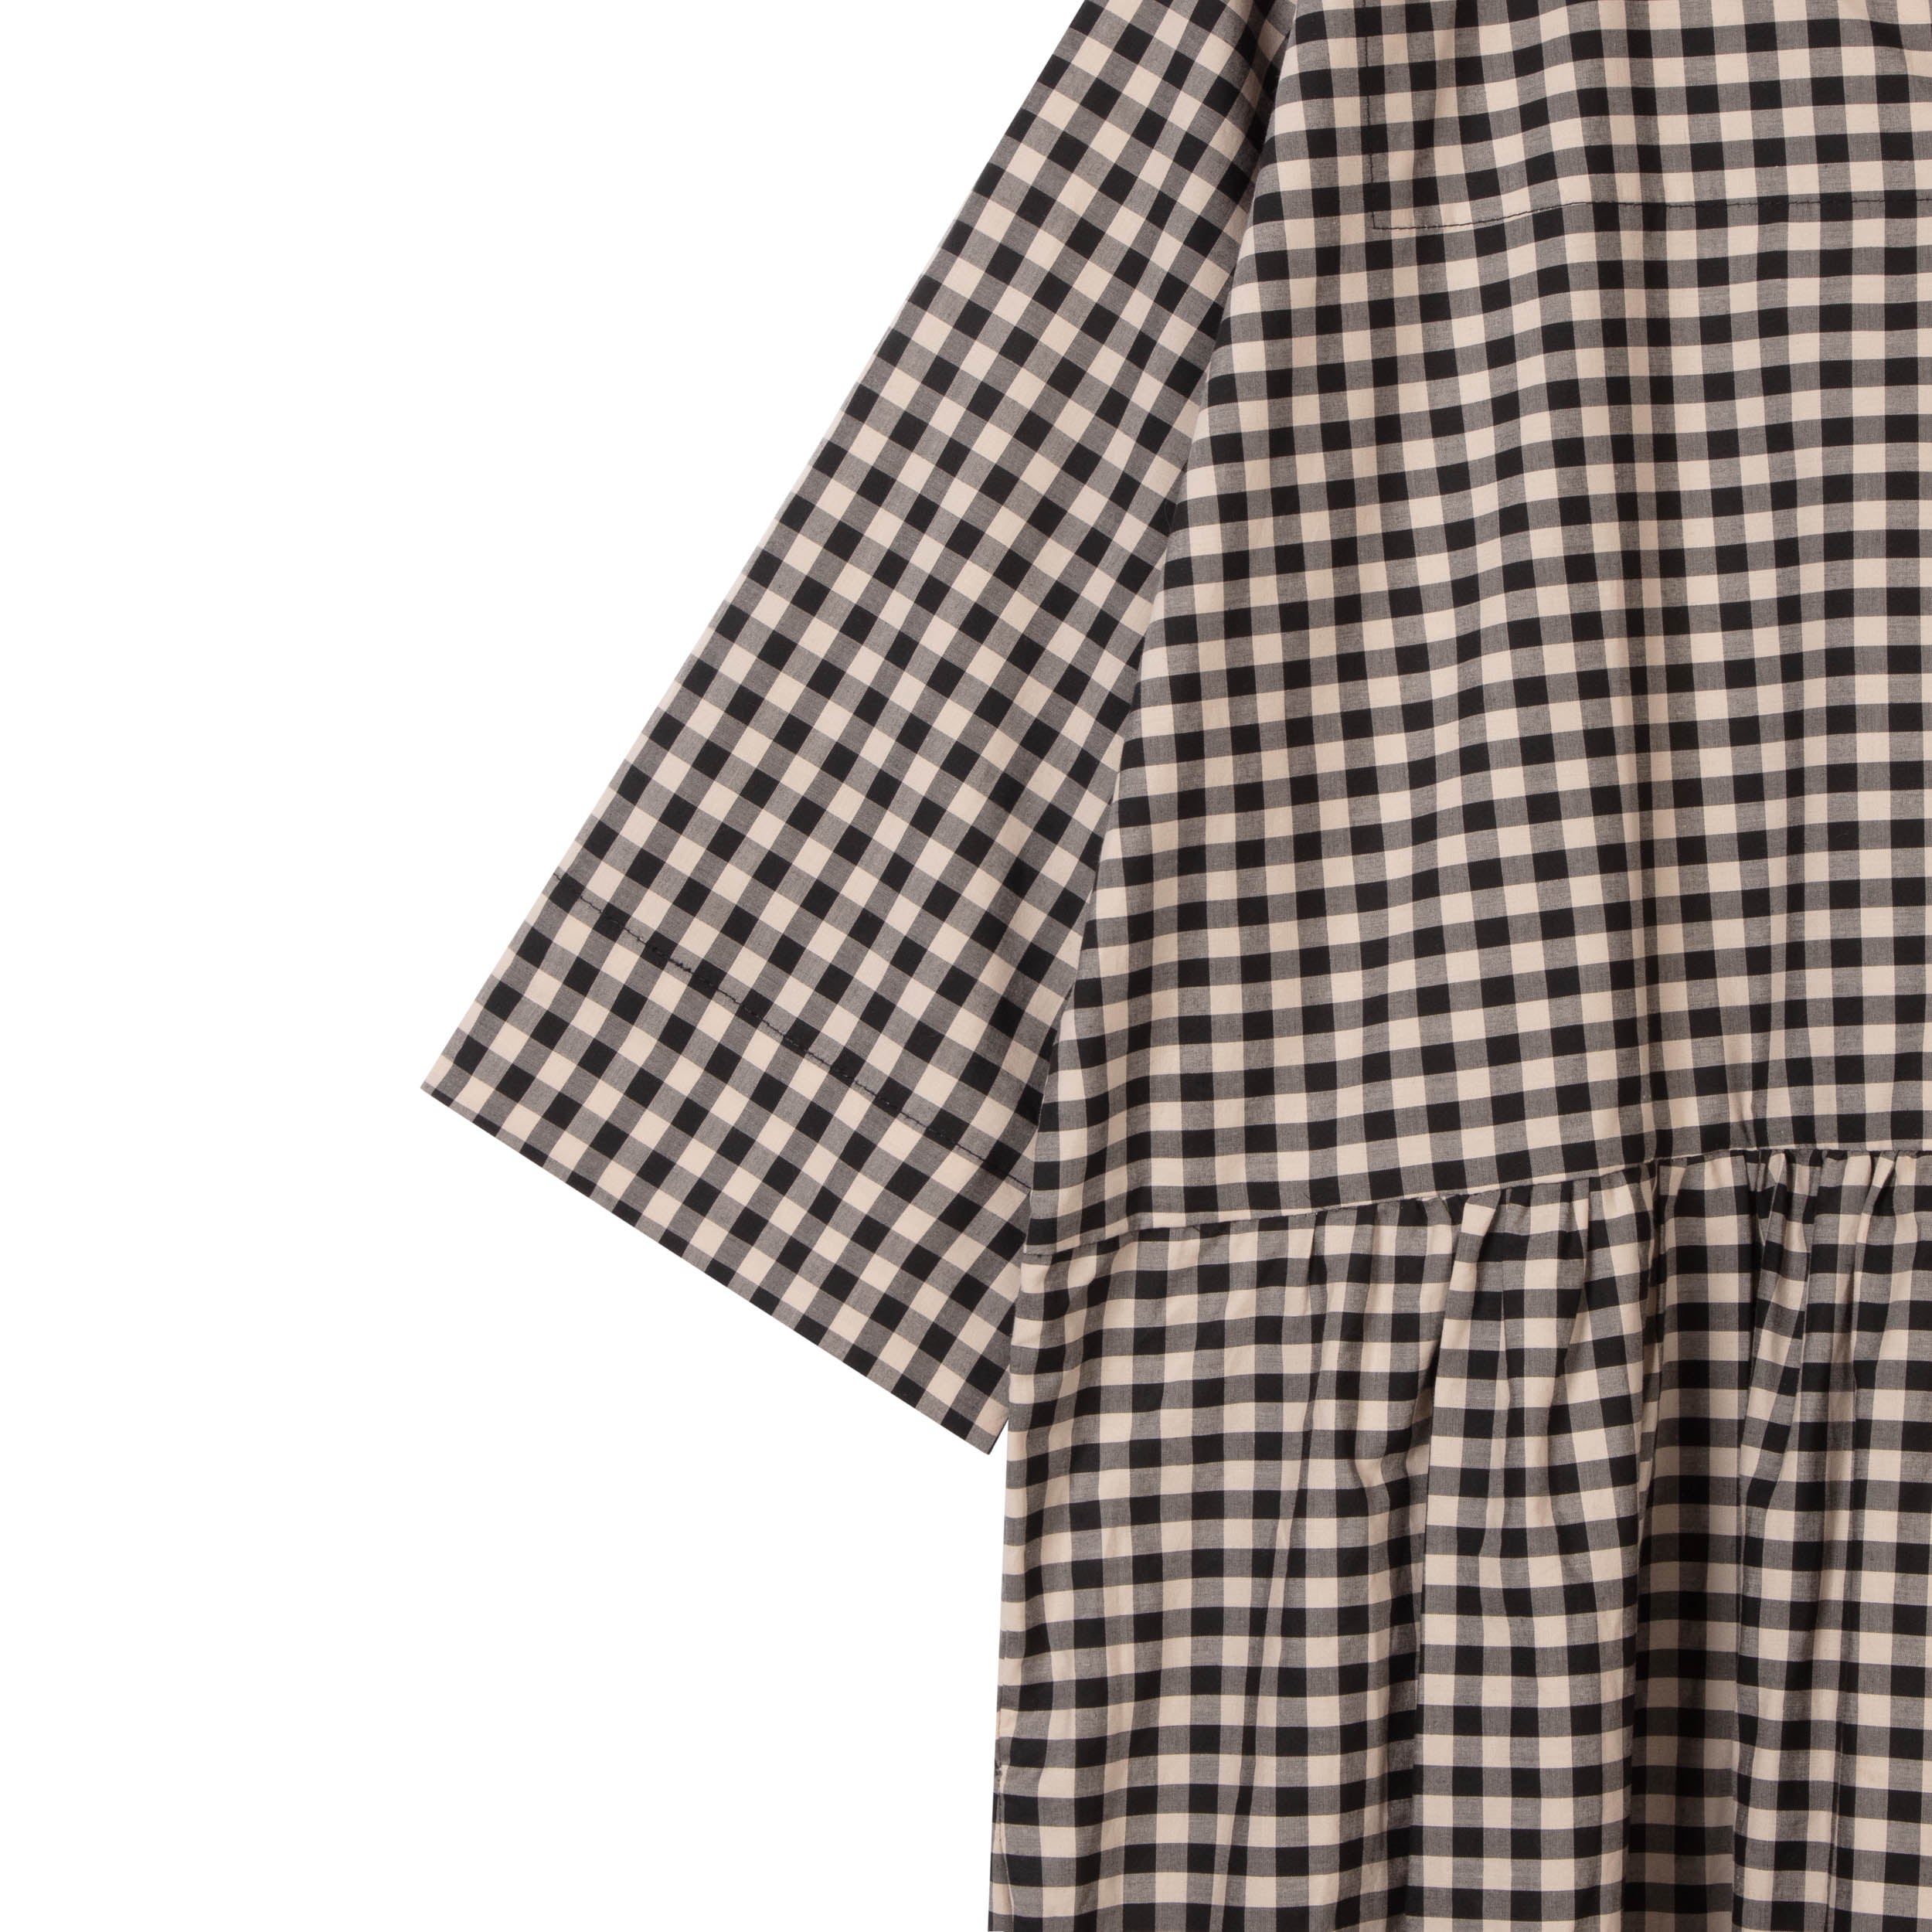 Carrier Company Chelsea Tee Shirt Dress in Black and Ivory Gingham Check